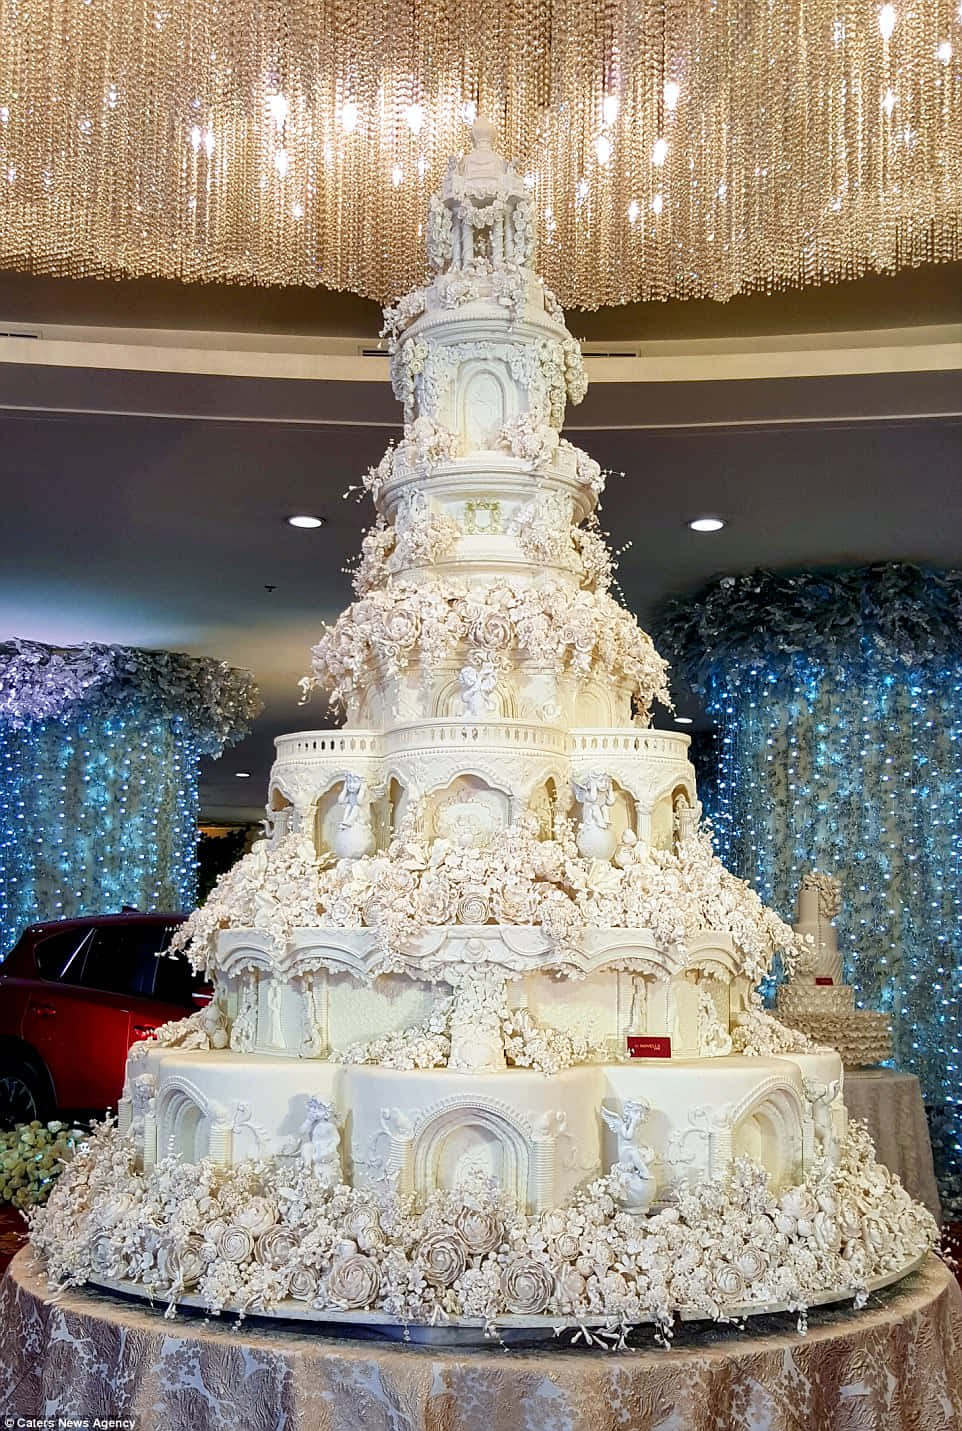 A Large White Wedding Cake Is On Display In A Room